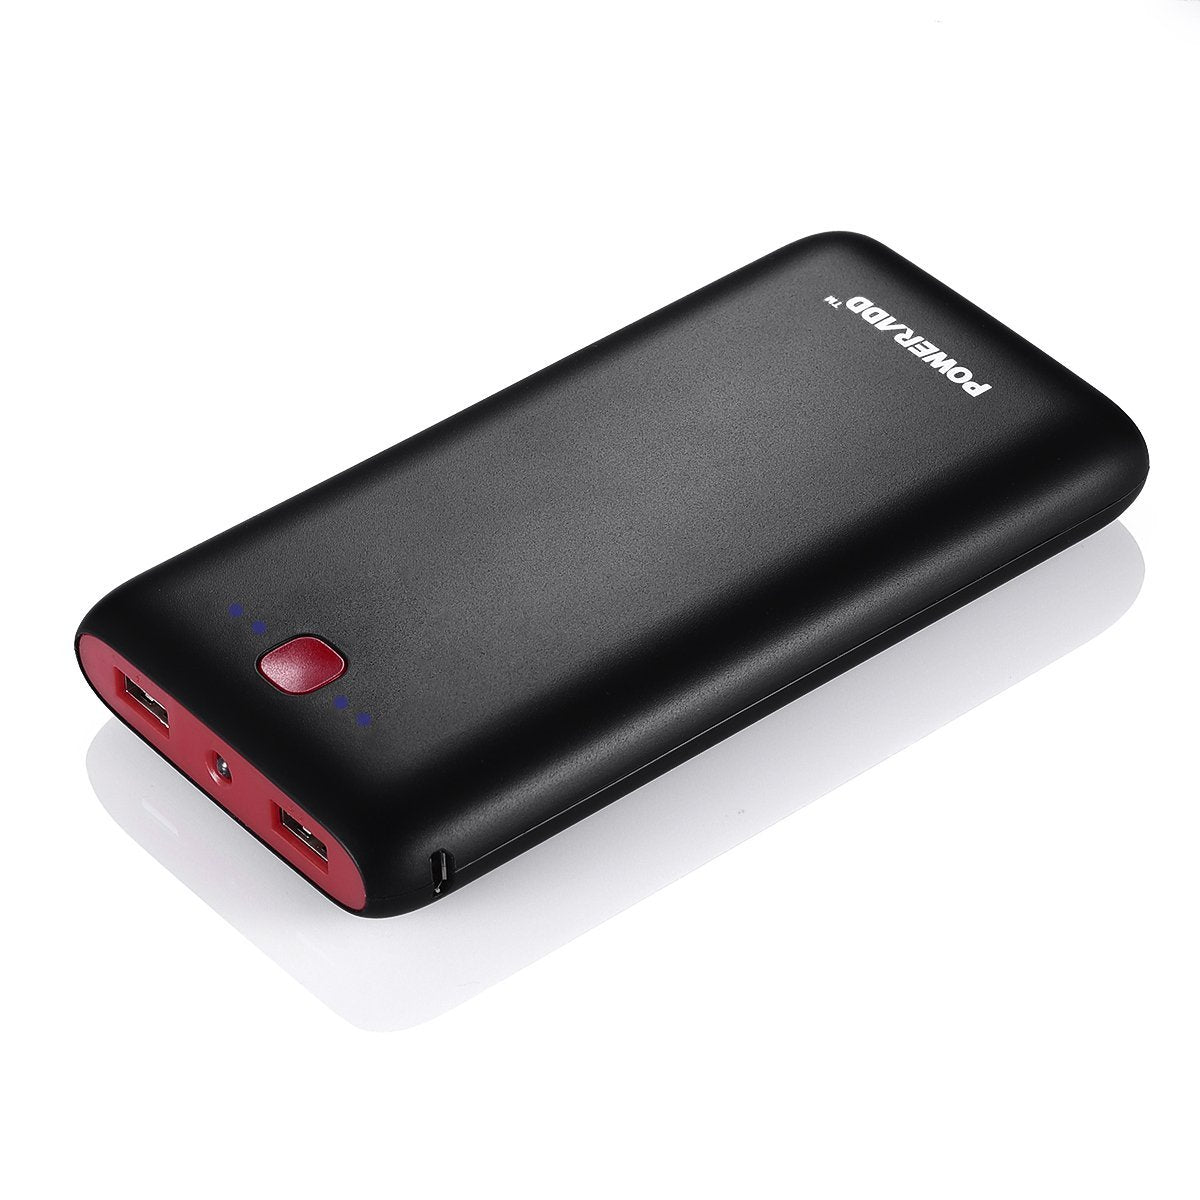 Poweradd Pilot X7 20000mAh Power Bank (Dual USB Port, 3.1A Total) External Portable Charger Battery Pack with LED Flashlight, Black+Red BATTPACK